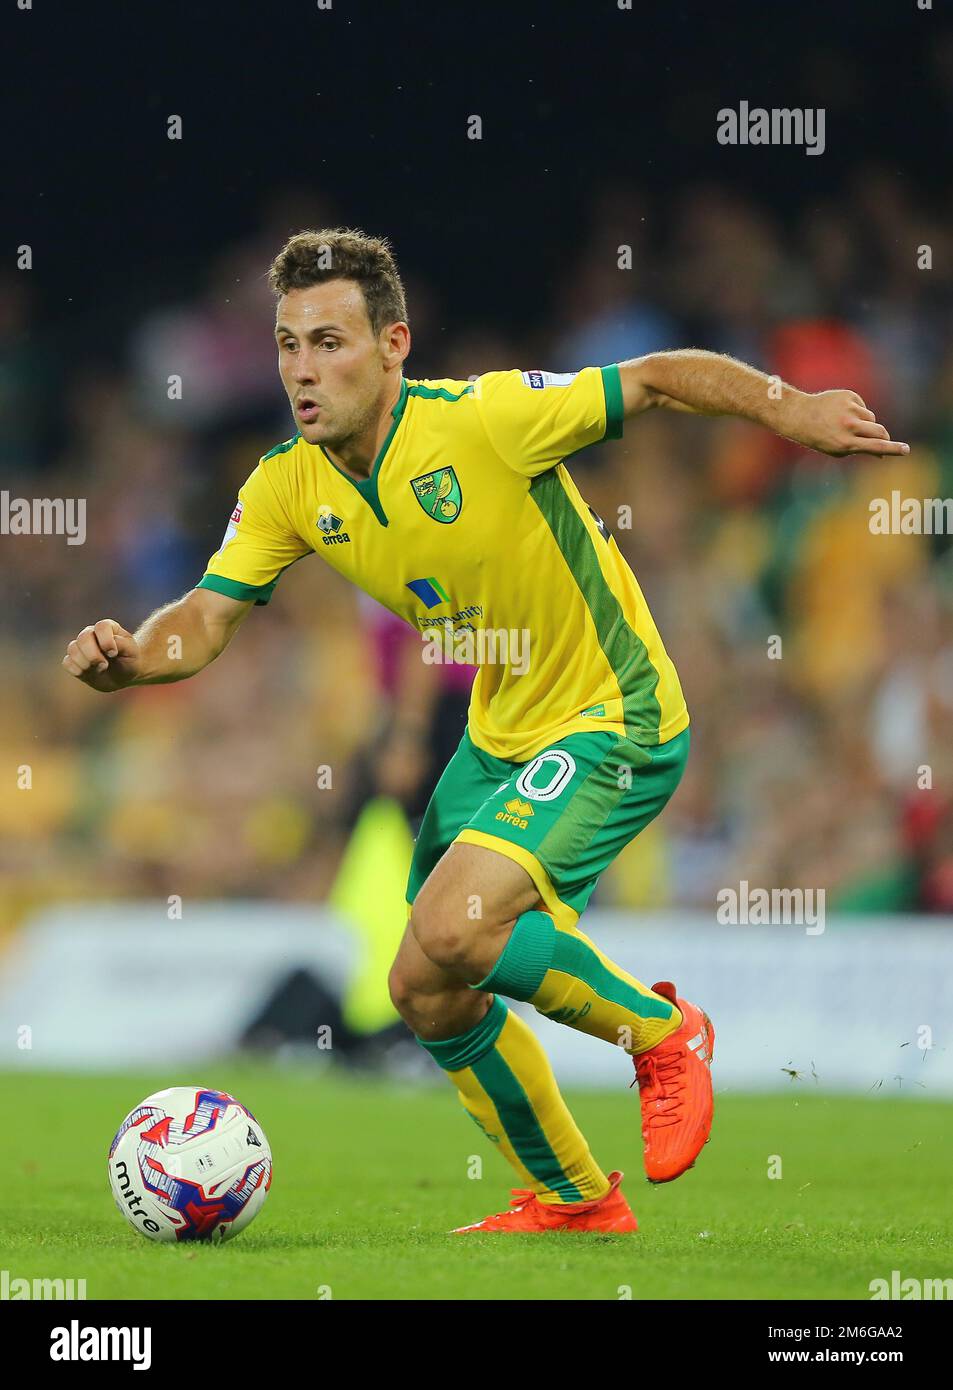 Tony Andreu aus Norwich City - Norwich City / Coventry City, zweite Runde des englischen Football League Cup, Carrow Road, Norwich - 23. August 2016. Stockfoto